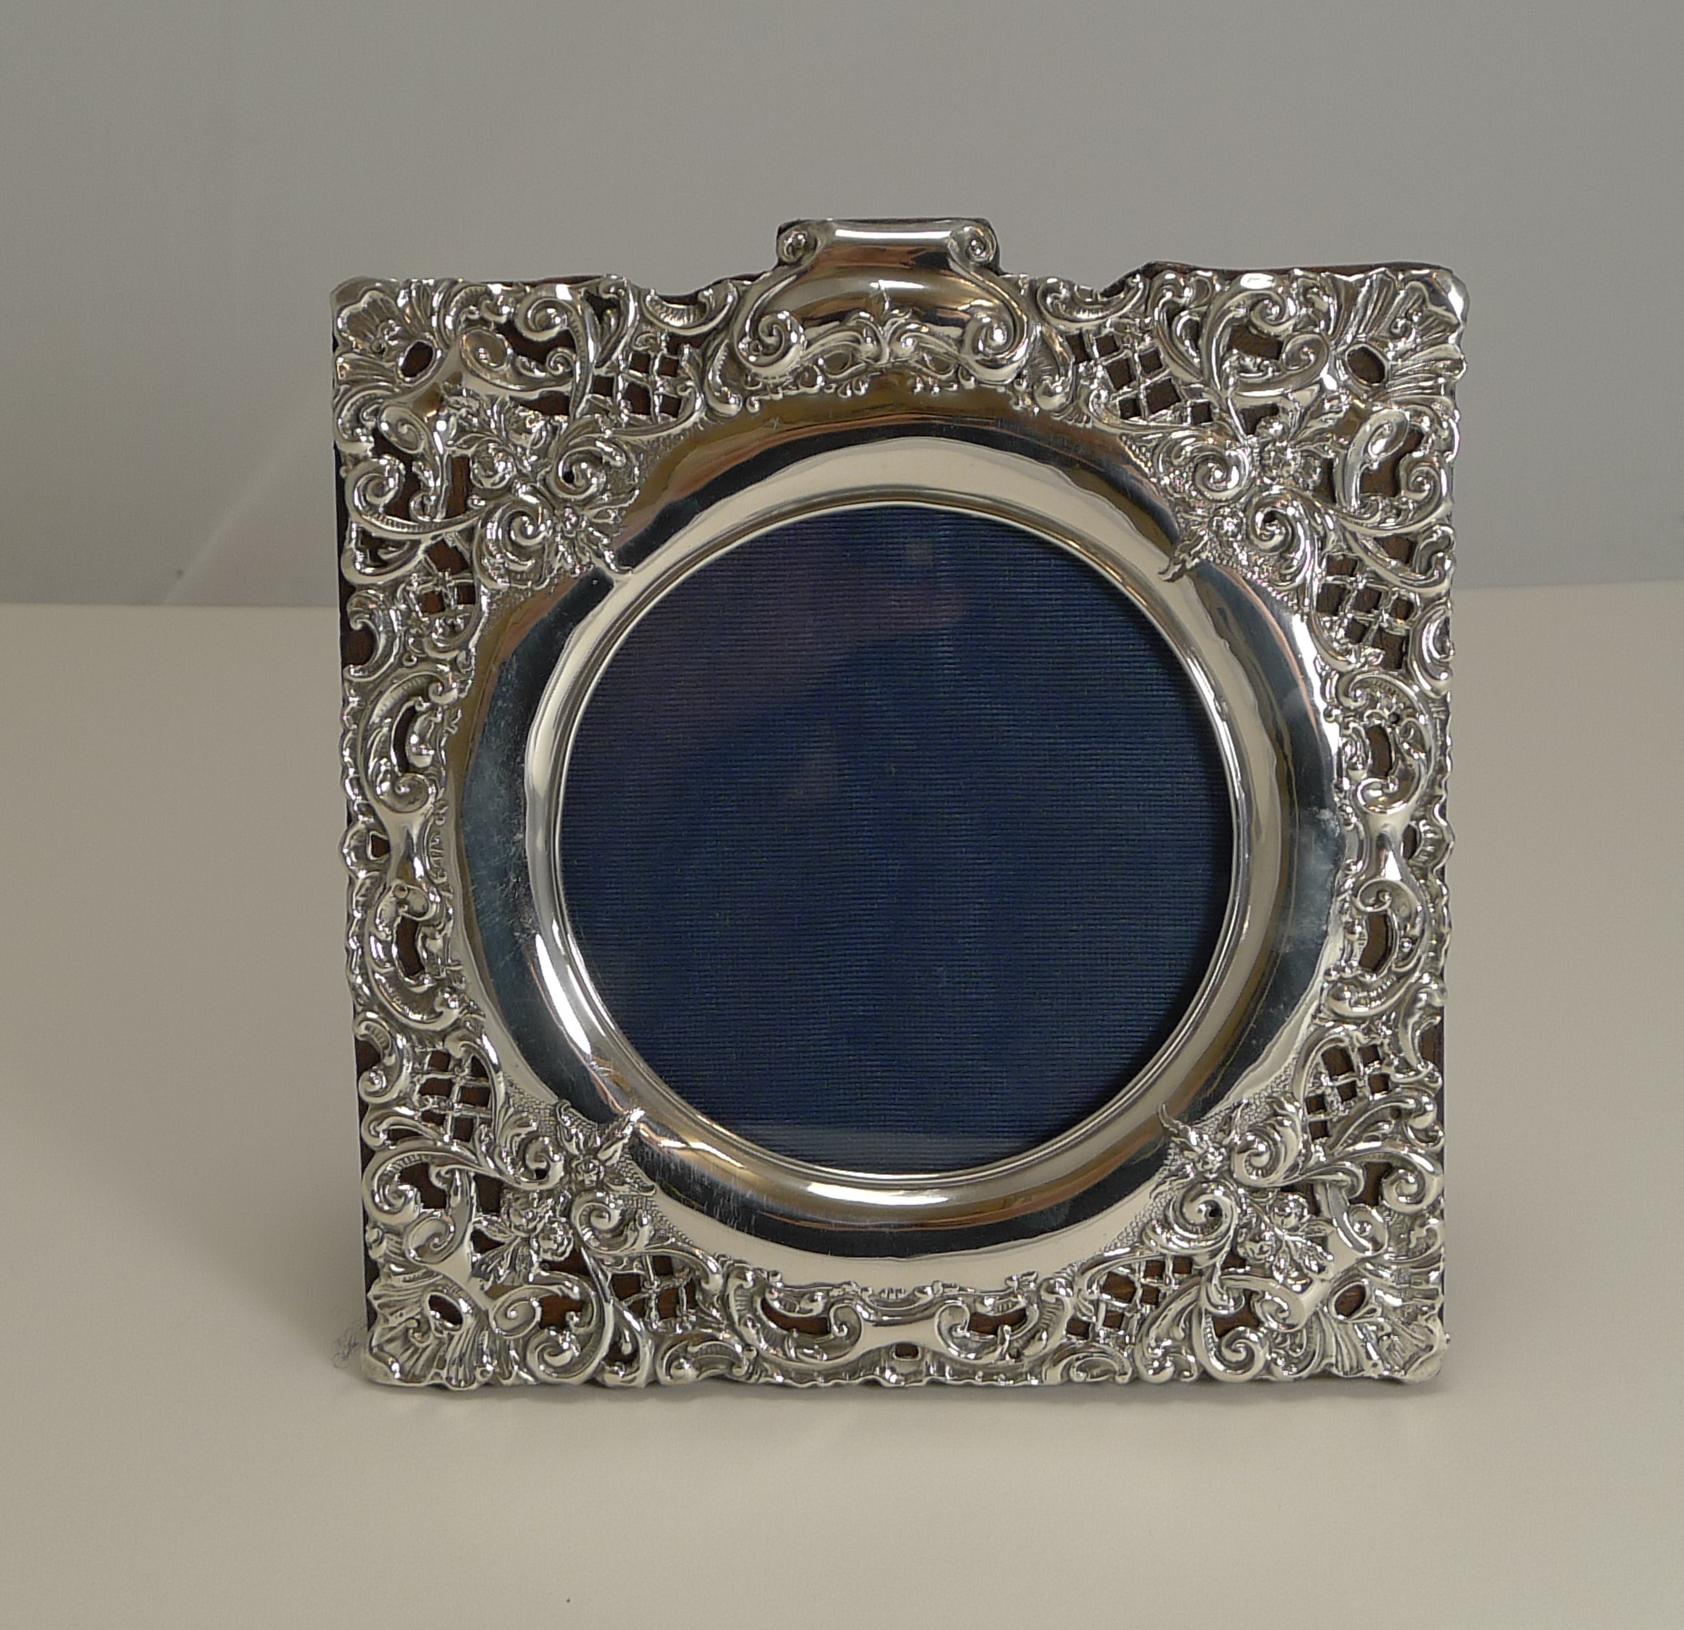 A stunning antique English sterling silver frame of square form with a circular glazed aperture.

The back is made from solid English oak and incorporates a folding easel stand. The intricate and highly decorative silver is topped with a scroll